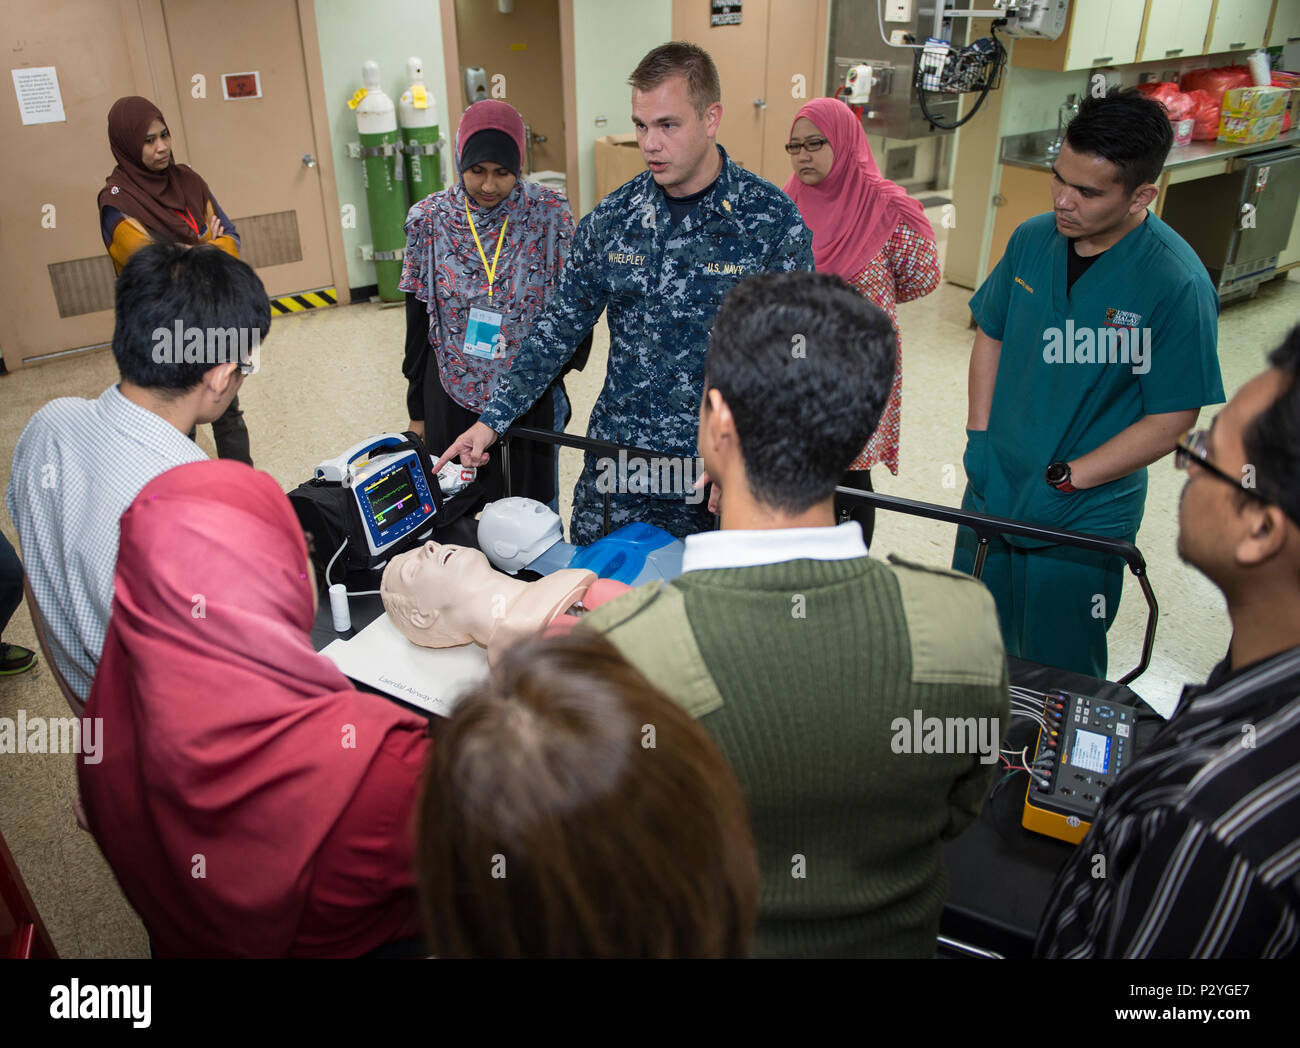 160809-N-QW941-076 KUANTAN, Malaysia (Aug. 9, 2016) Lt. Steven Whelpley (center), a native of Fredericksburg, Virginia and an emergency physician assigned to hospital ship USNS Mercy (T-AH 19), reviews defibrillator operations during a Pacific Partnership 2016 advanced cardiovascular life support training course aboard Mercy. During the training, Pacific Partnership 2016 personnel and Malaysian doctors discussed guidelines for treating patients with cardiac arrest and other life threatening emergencies. This is the first time Mercy and Pacific Partnership have visited Malaysia. During the miss Stock Photo